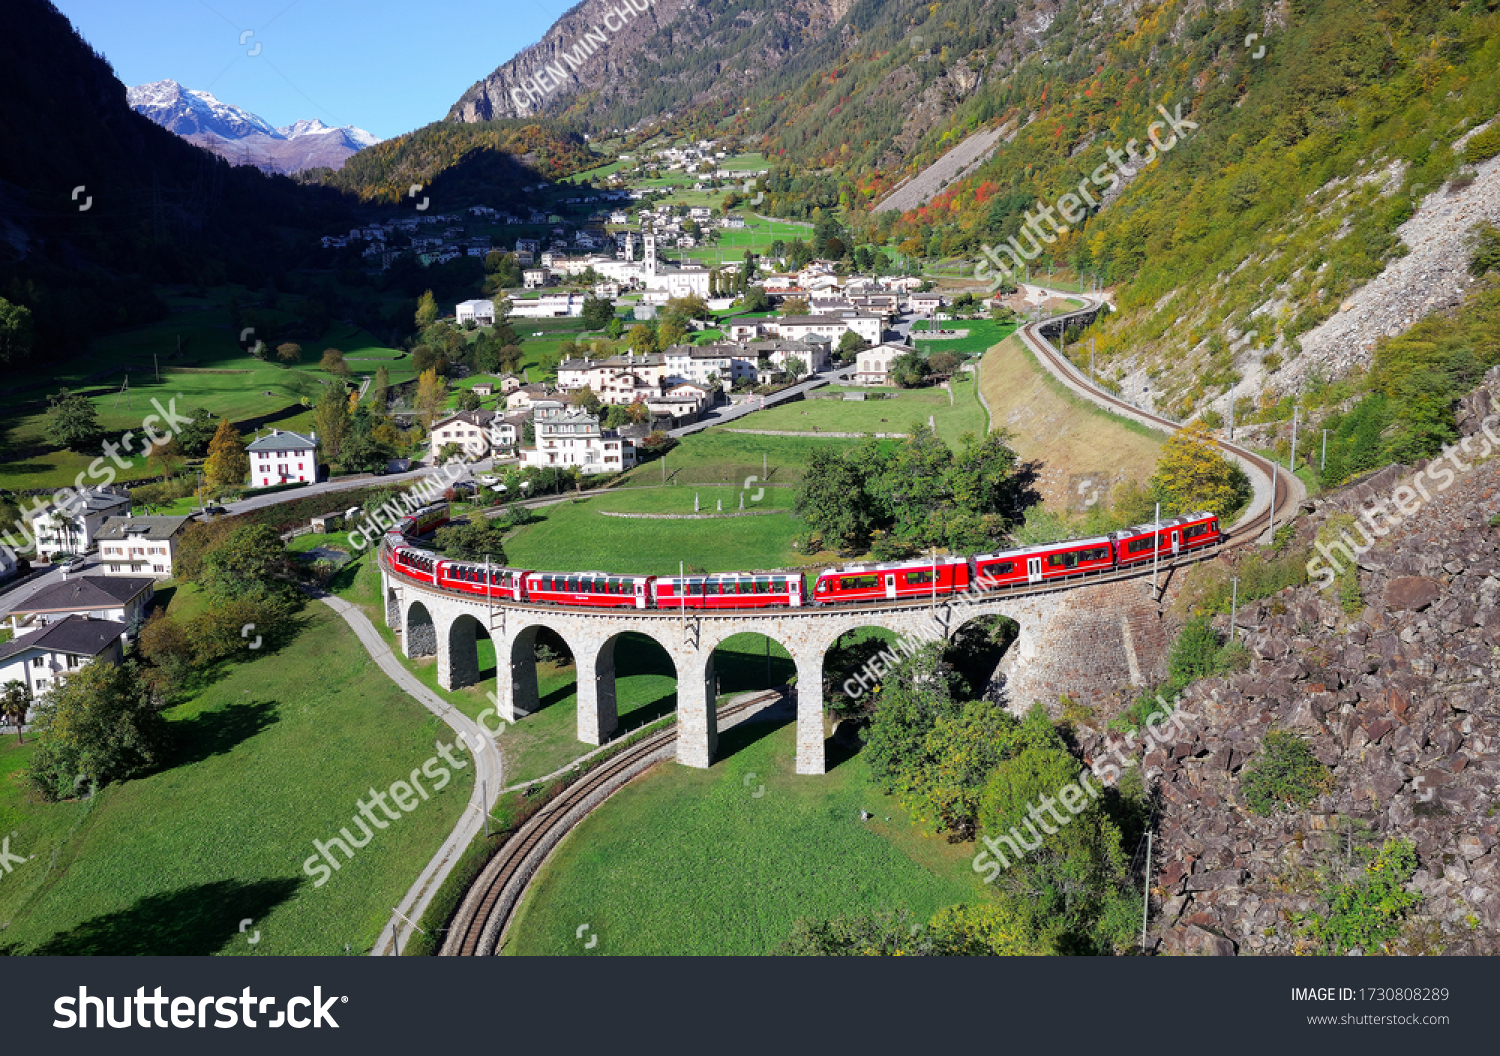 Aerial view of a Bernina Express train crossing the famous Brusio spiral viaduct of Rhaetian Railway over a green grassy meadow with fall colors on the rocky mountainside, in Graubunden, Switzerland #1730808289